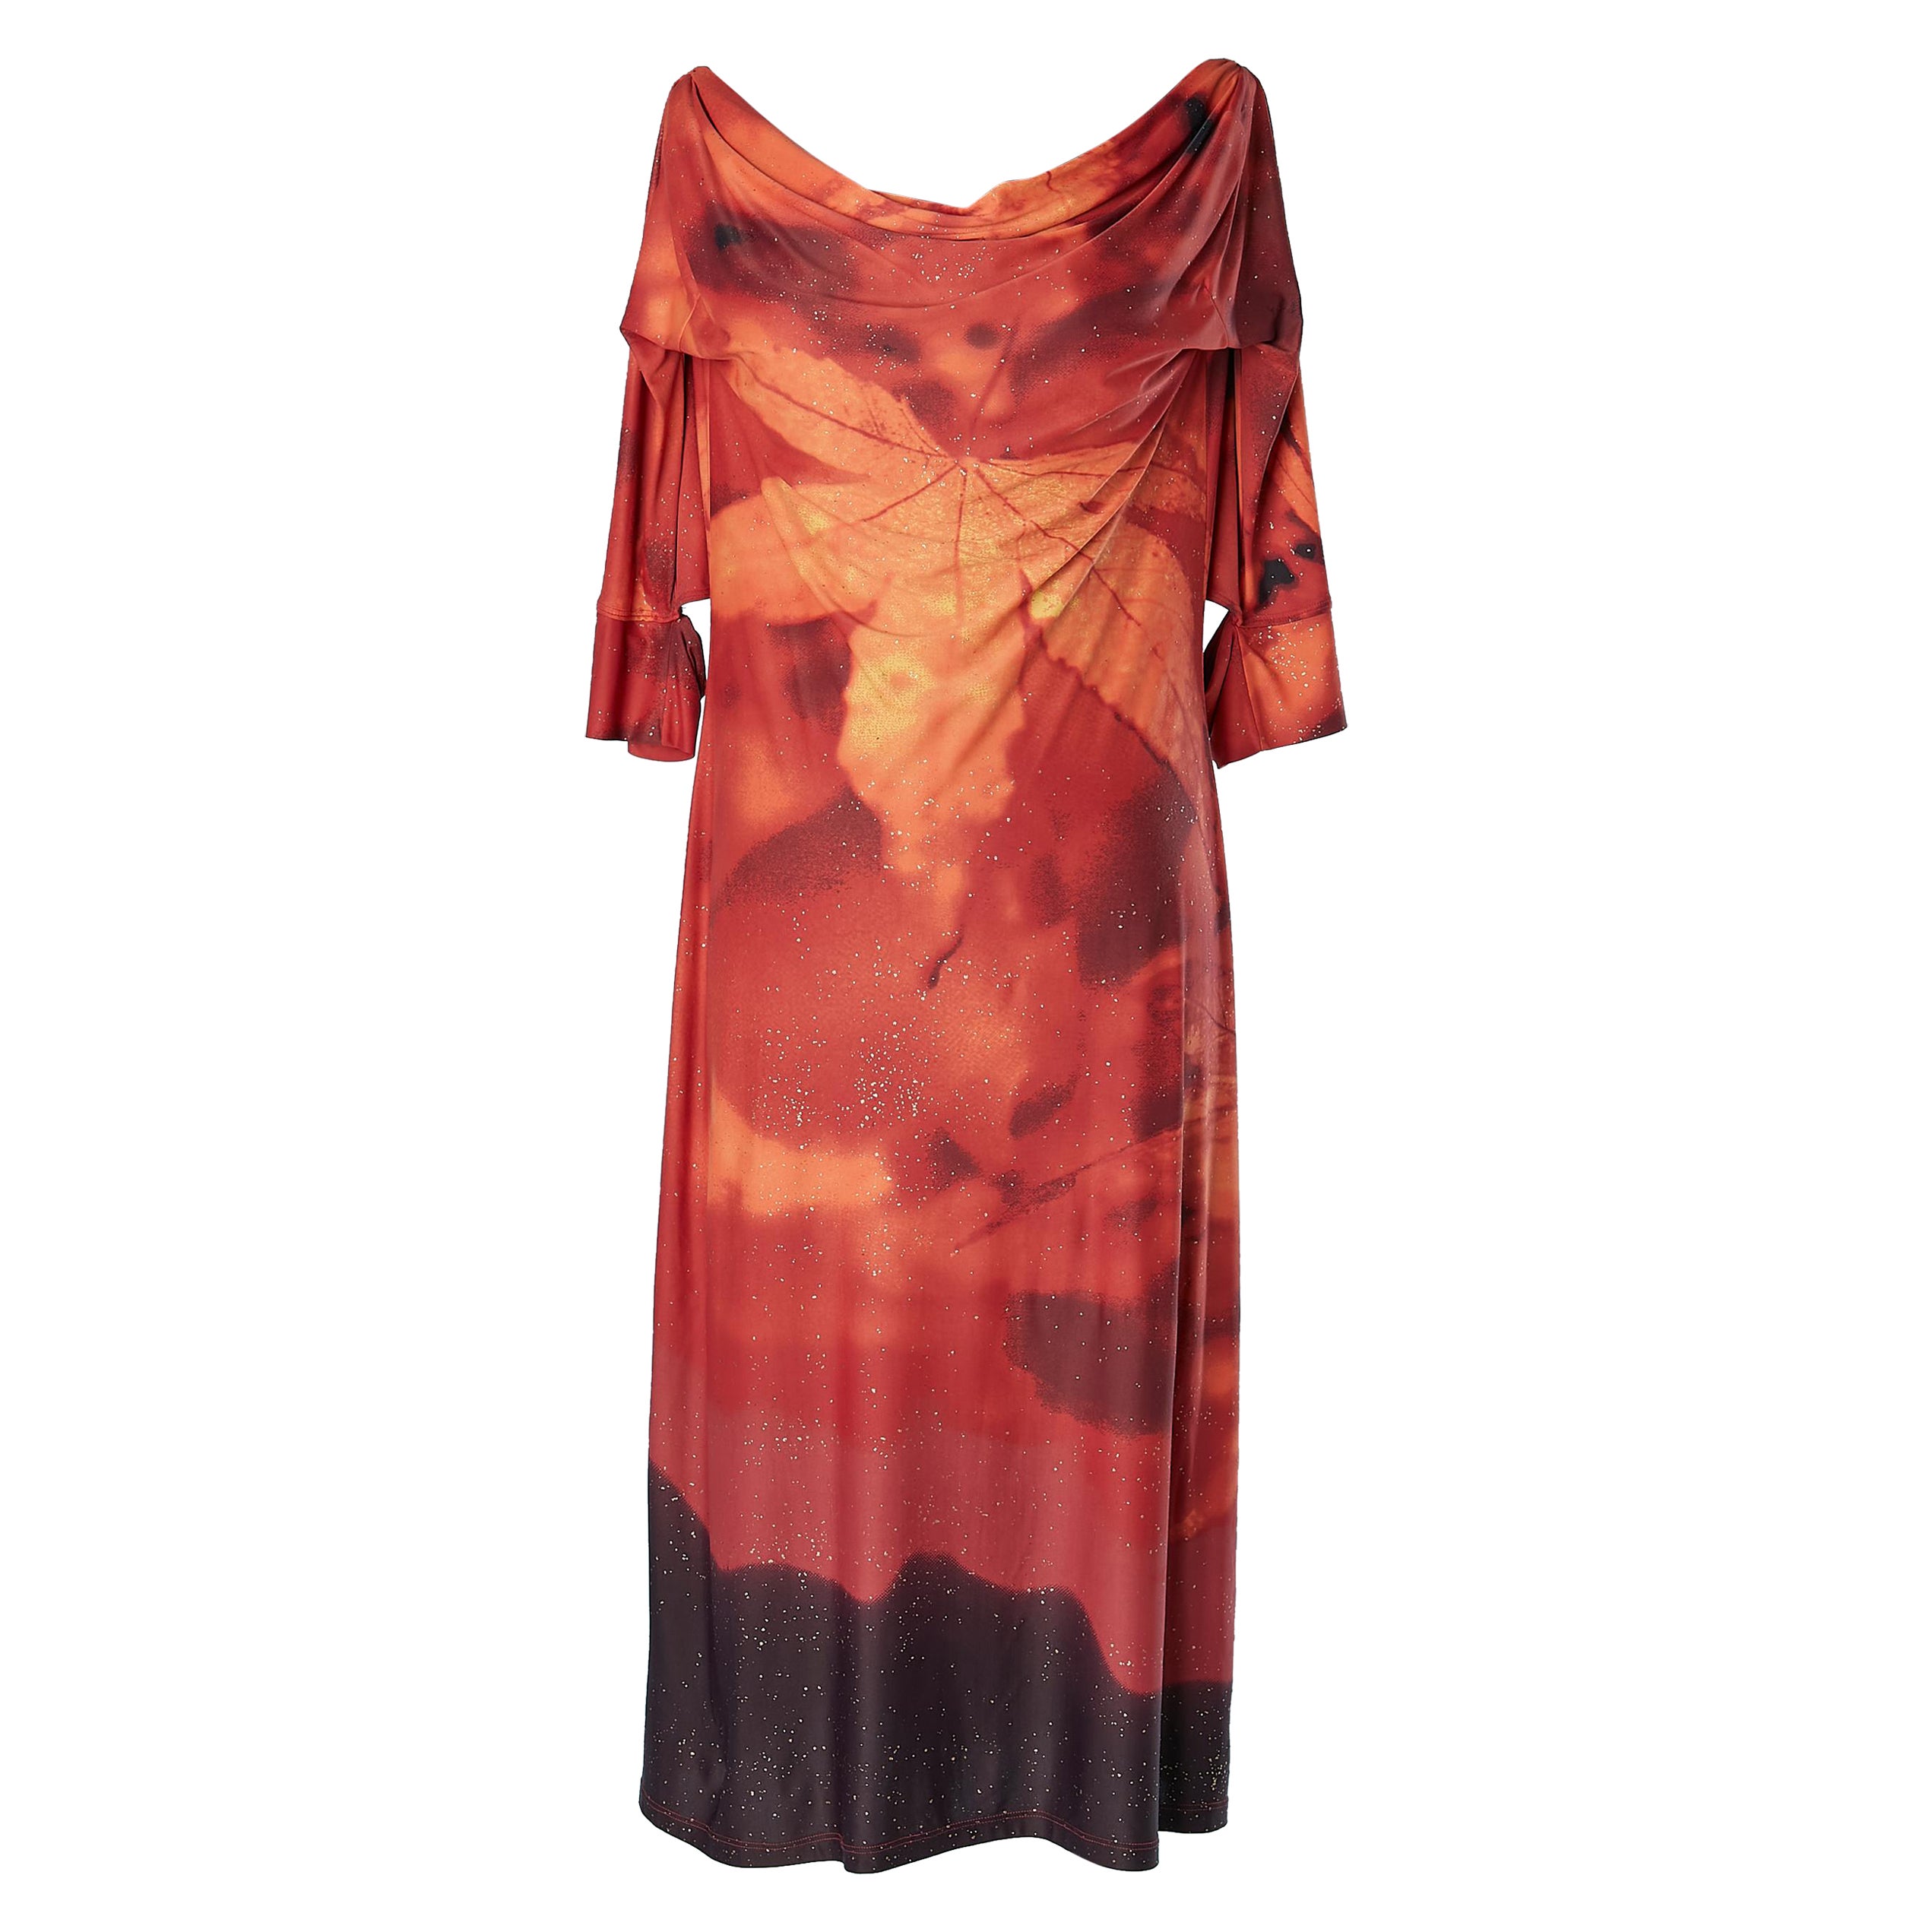 Fall leaves printed jersey dress with tiny gold splatch Roberto Cavalli  For Sale